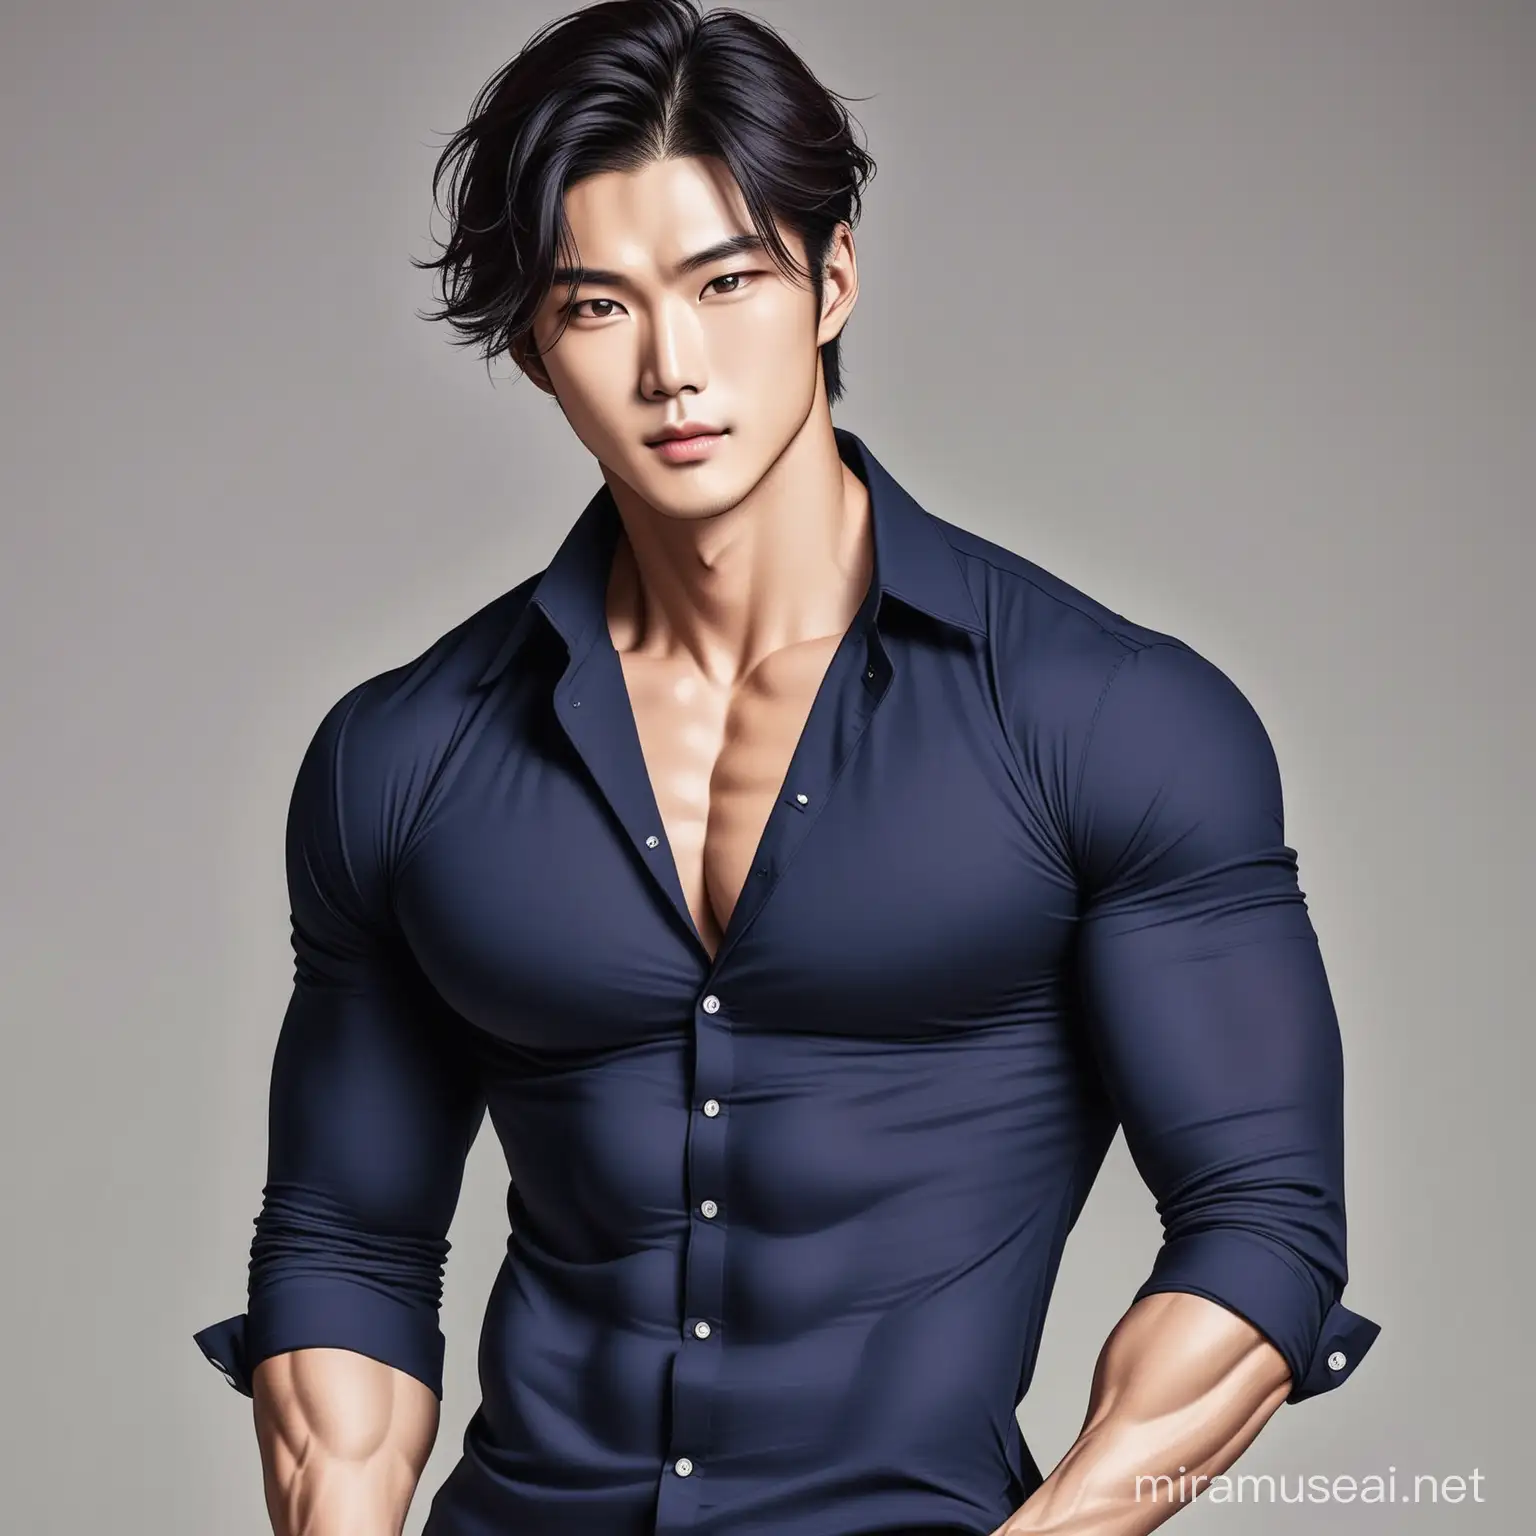 Stylish Korean Man in Navy Open Collar Shirt Shows Off Muscles